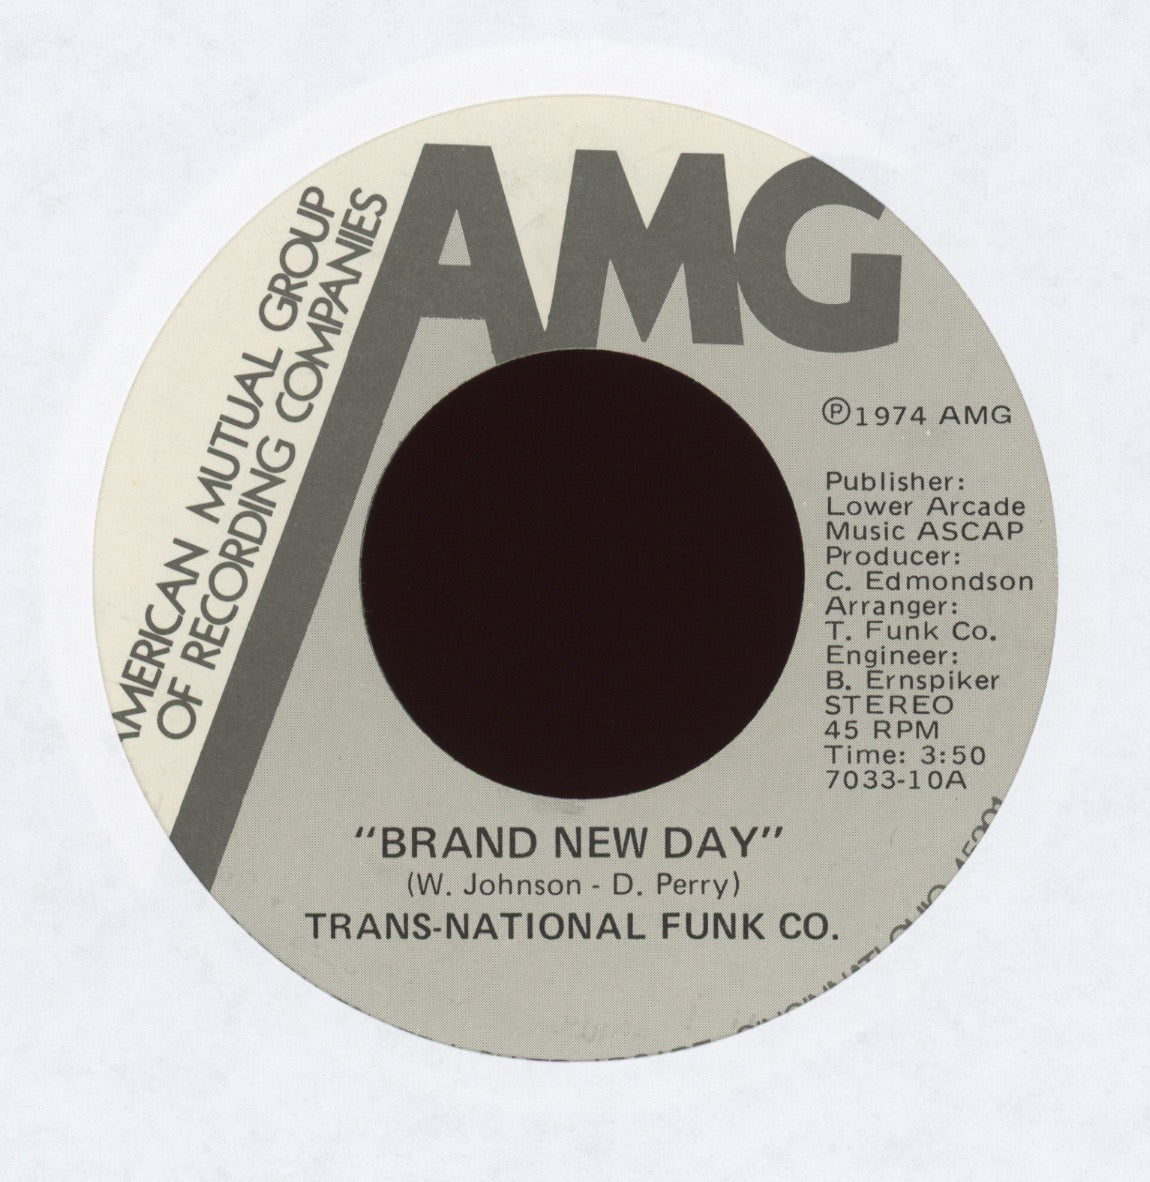 Trans-National Funk Co. - Brand New Day on AMG Sweet Soul Funk 45